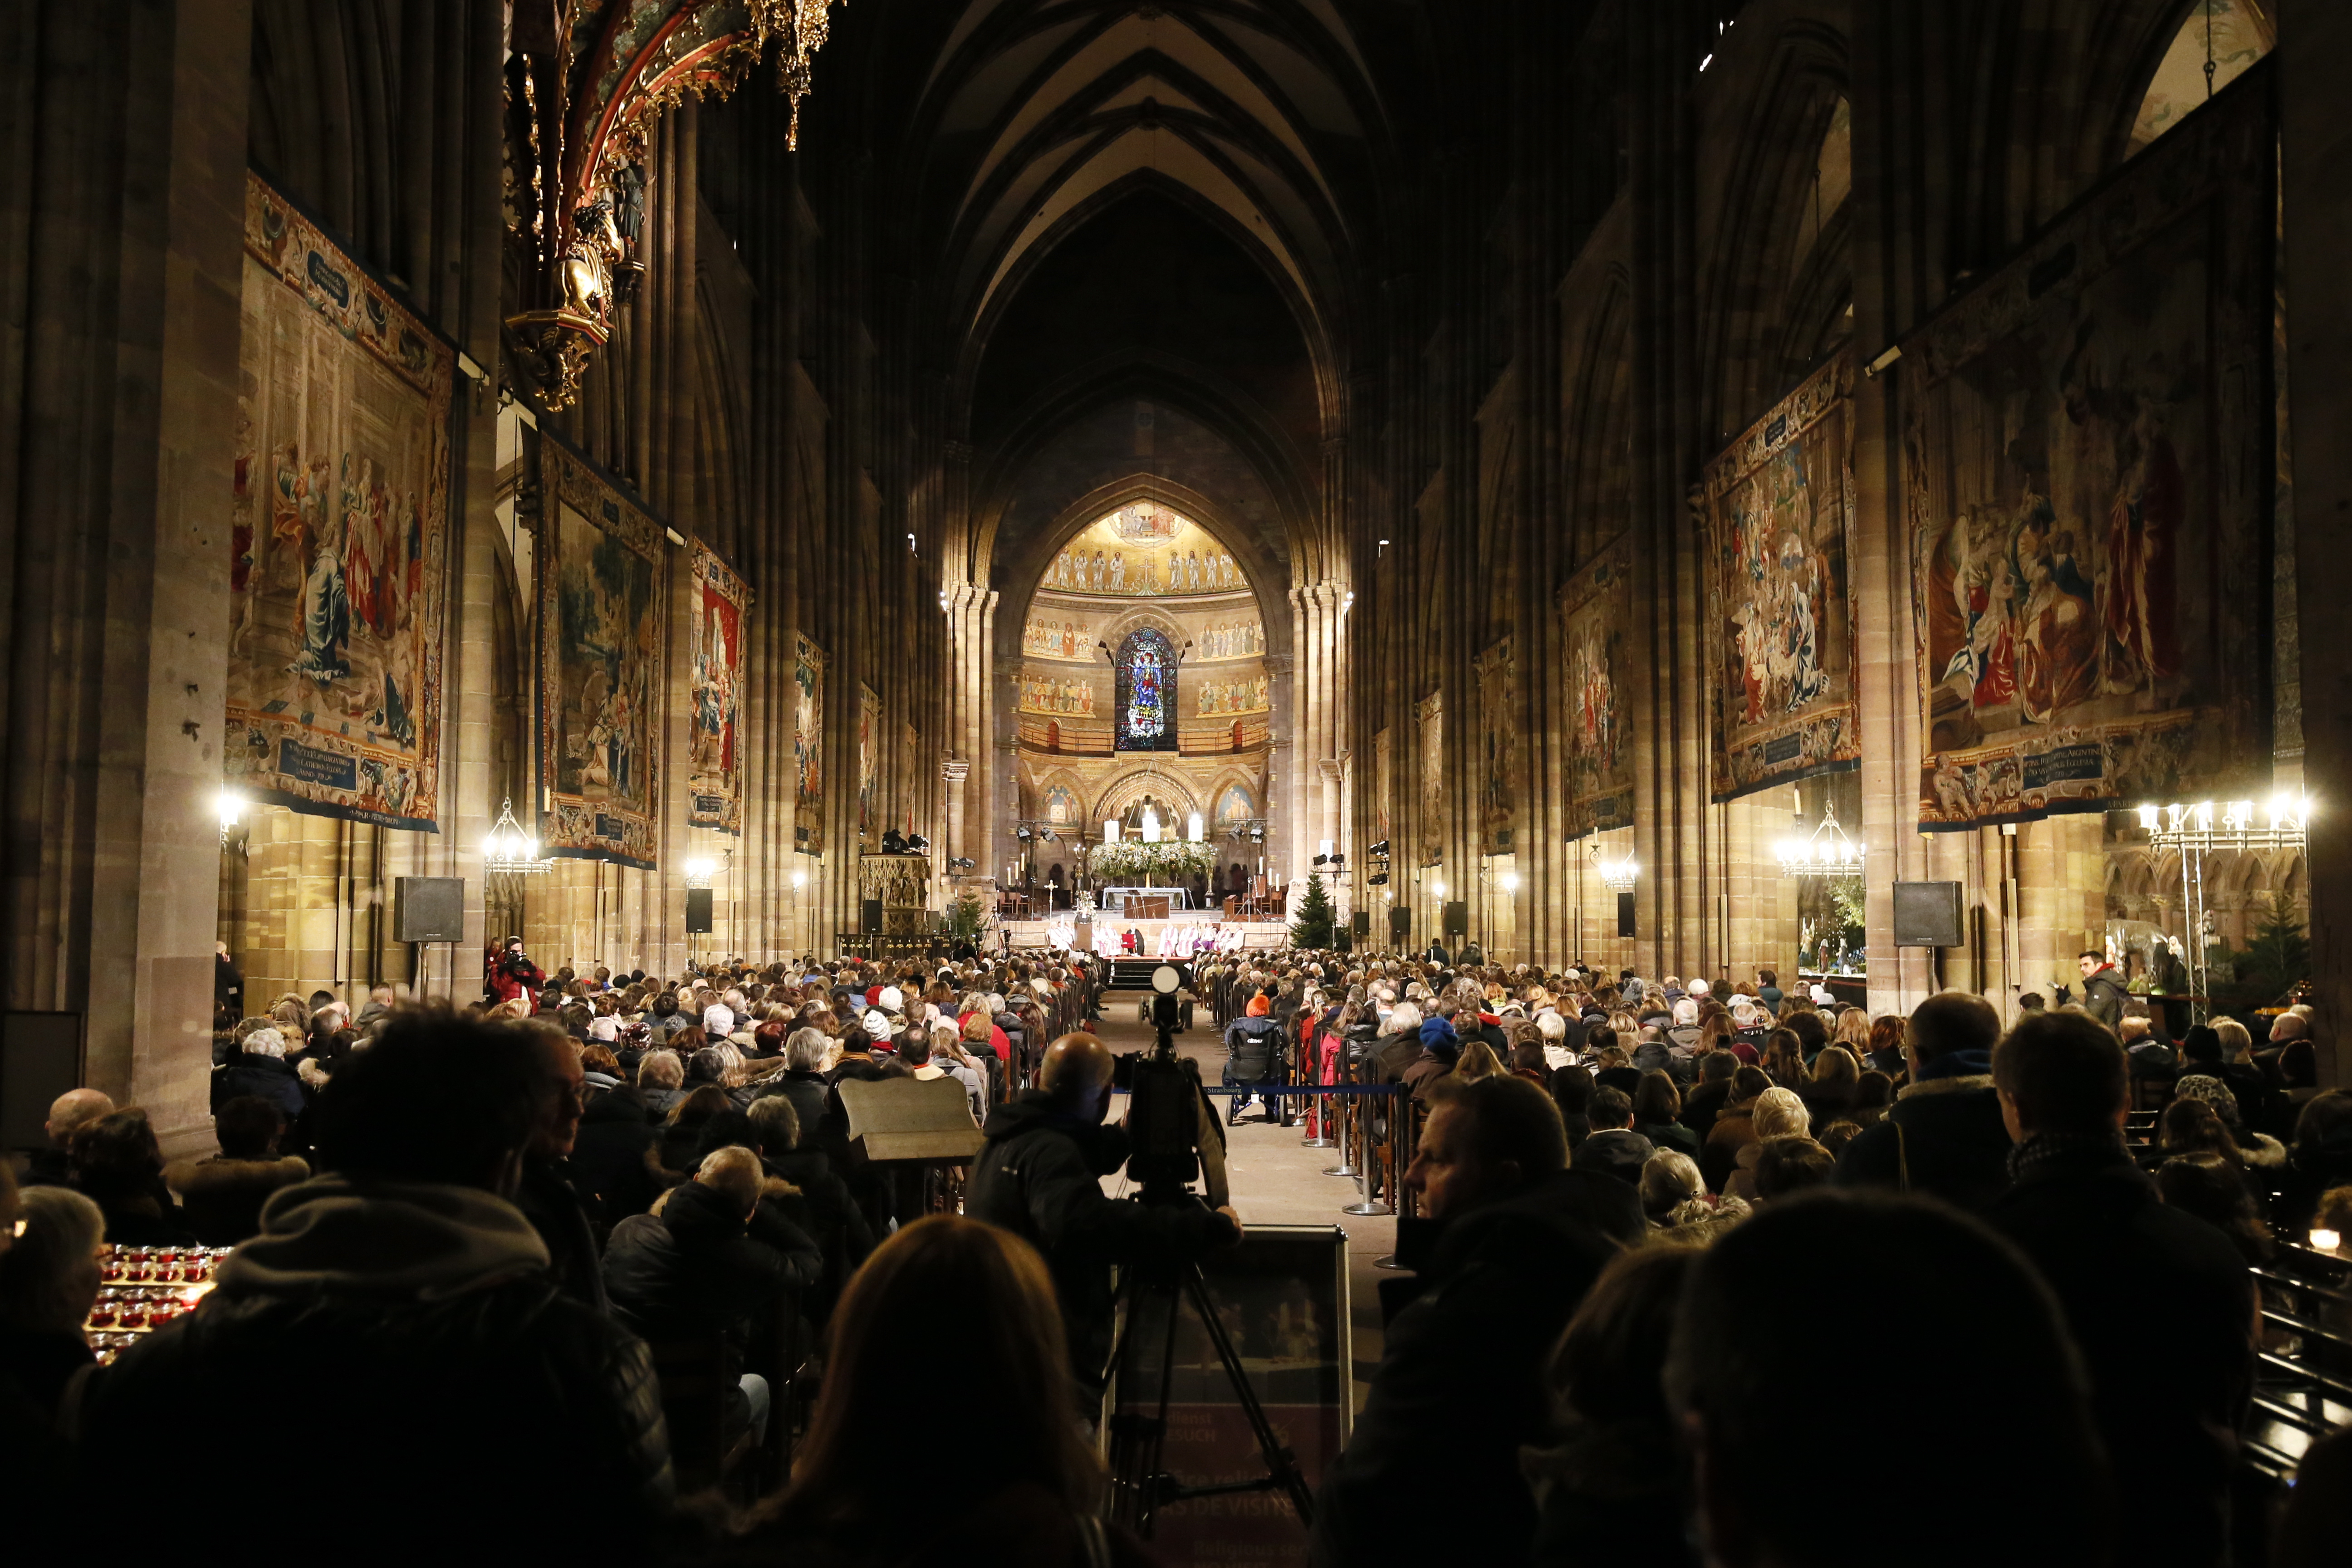 epa07229218 People attend a prayer vigil to honor the victims of the Christmas market attack, held at the Cathedral of Our Lady of Strasbourg, France, 13 December 2018. A manhunt is underway for the suspected perpetrator of the attack, Cherif Chekatt.  EPA/RONALD WITTEK